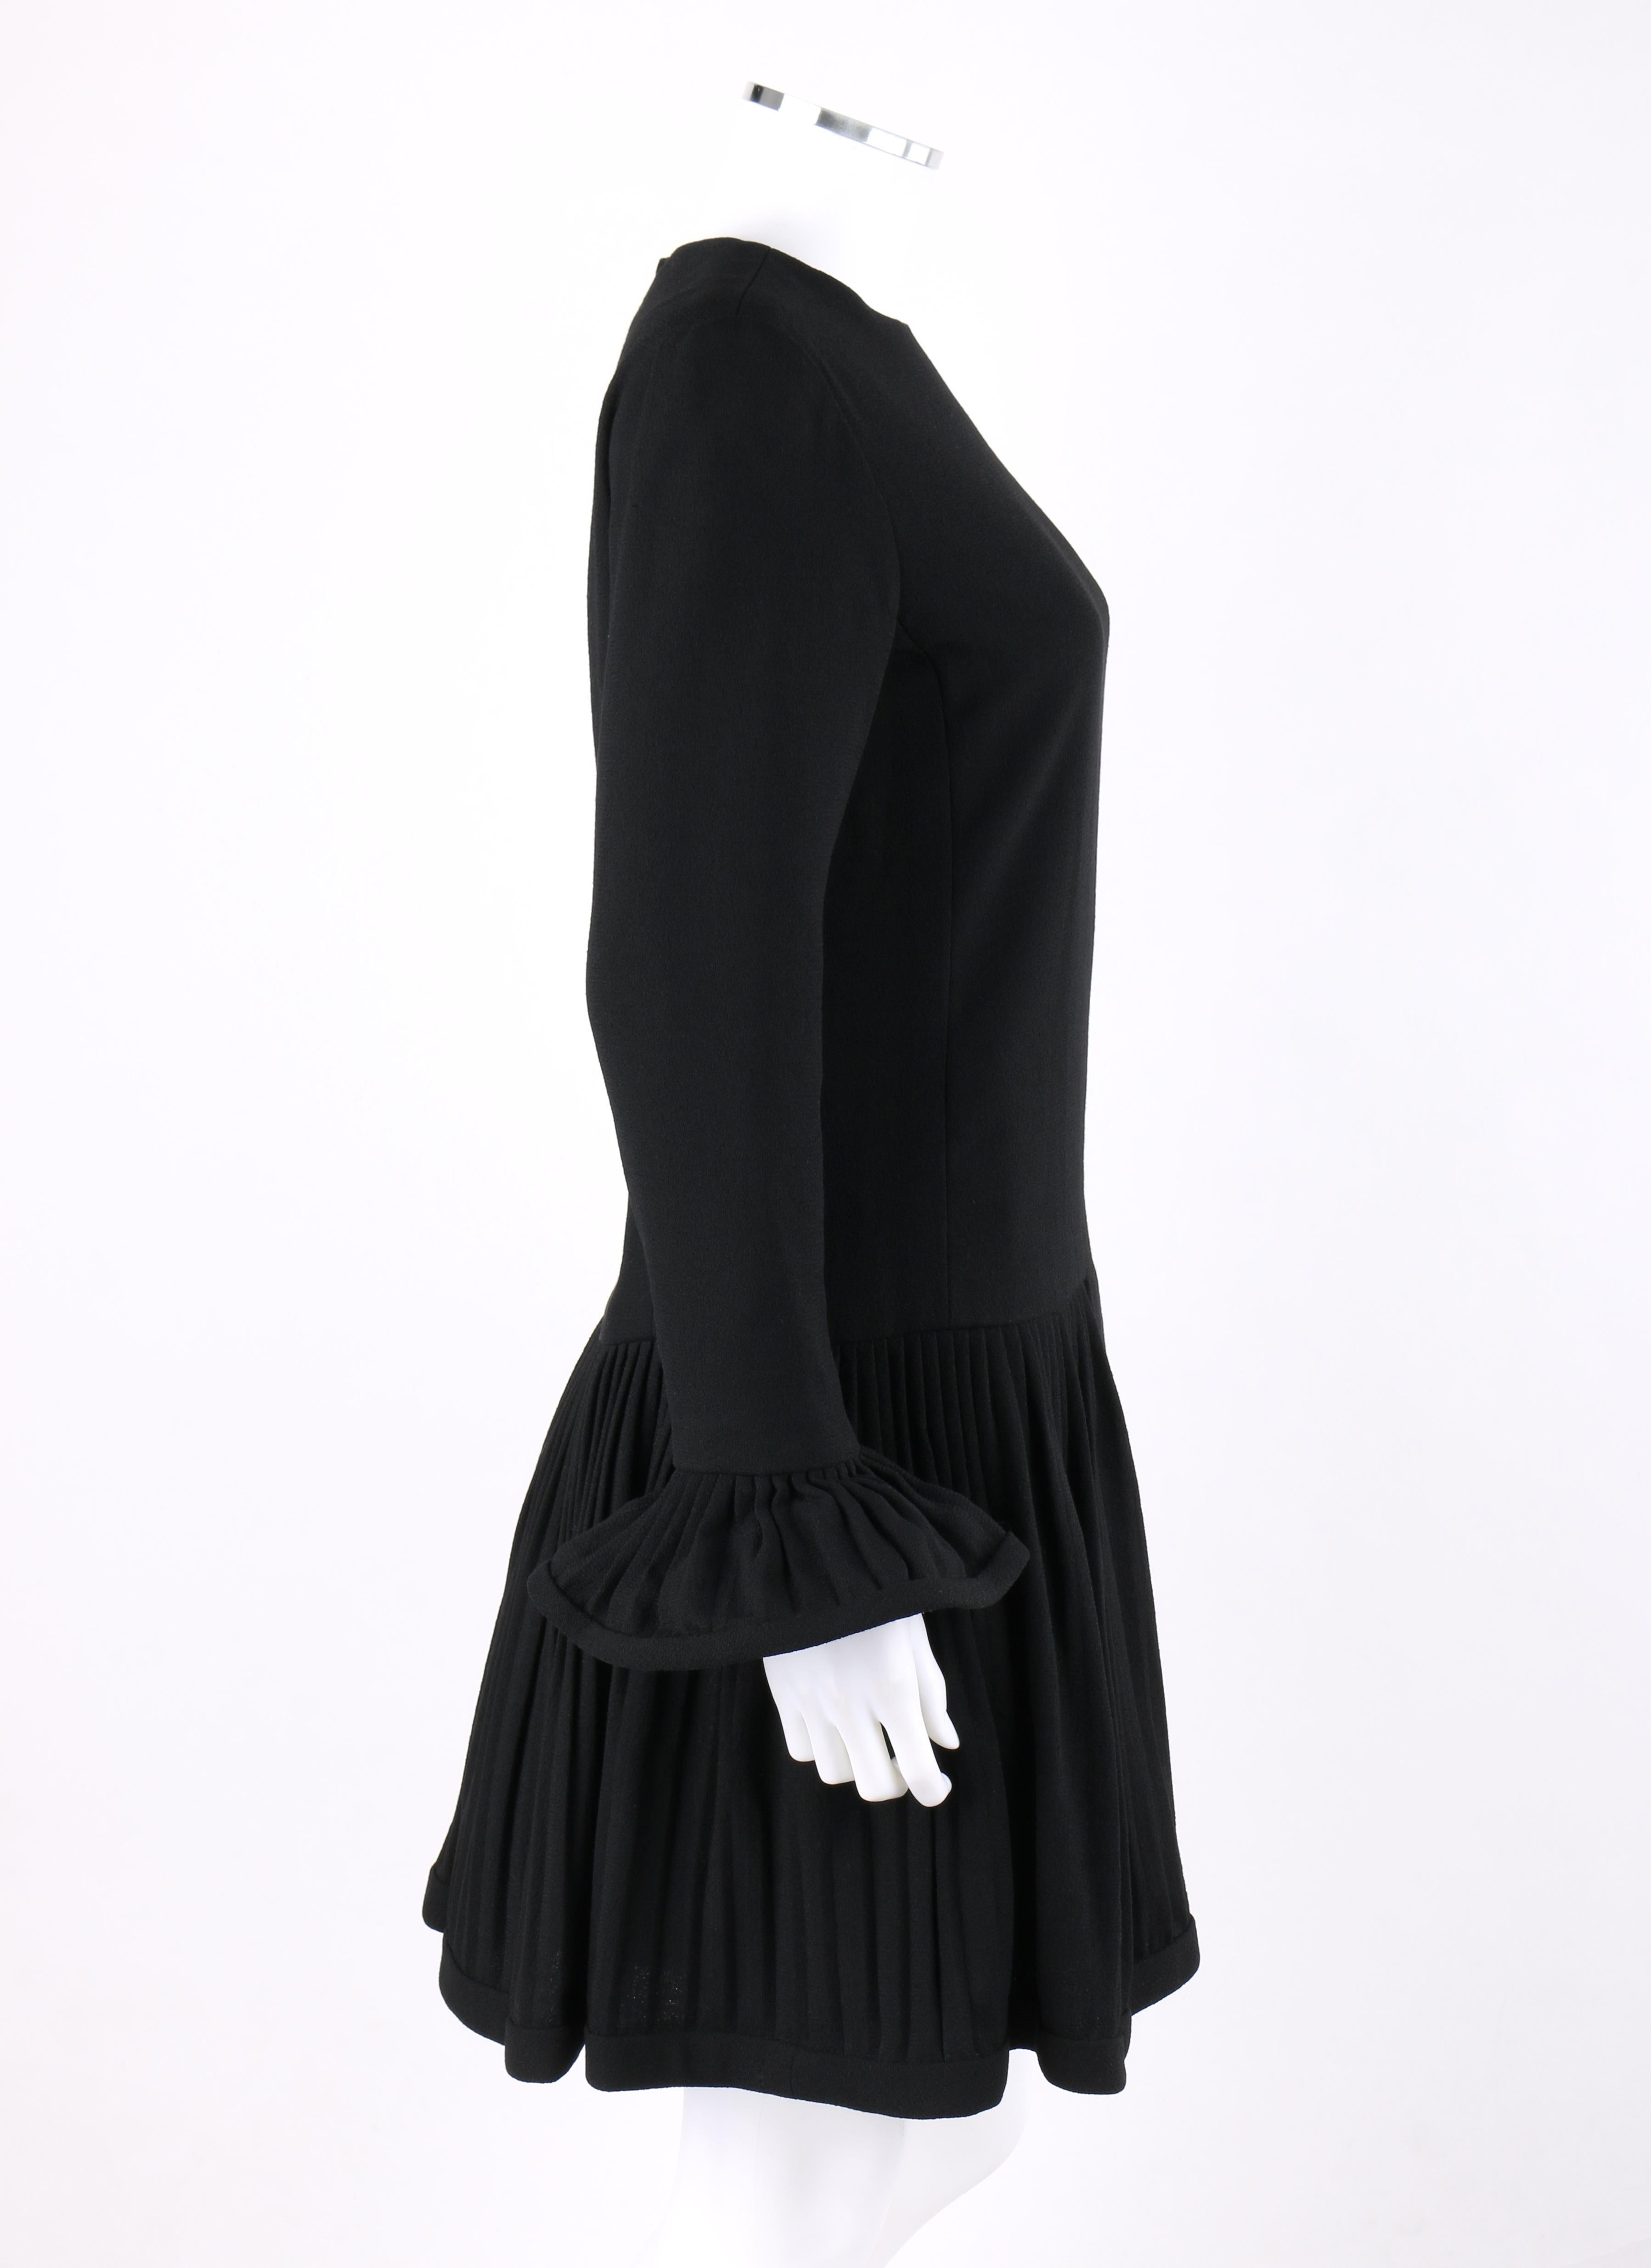 PIERRE CARDIN c.1960’s Mod Space Age Black Drop Waist Dress Accordion Pleating In Good Condition For Sale In Thiensville, WI